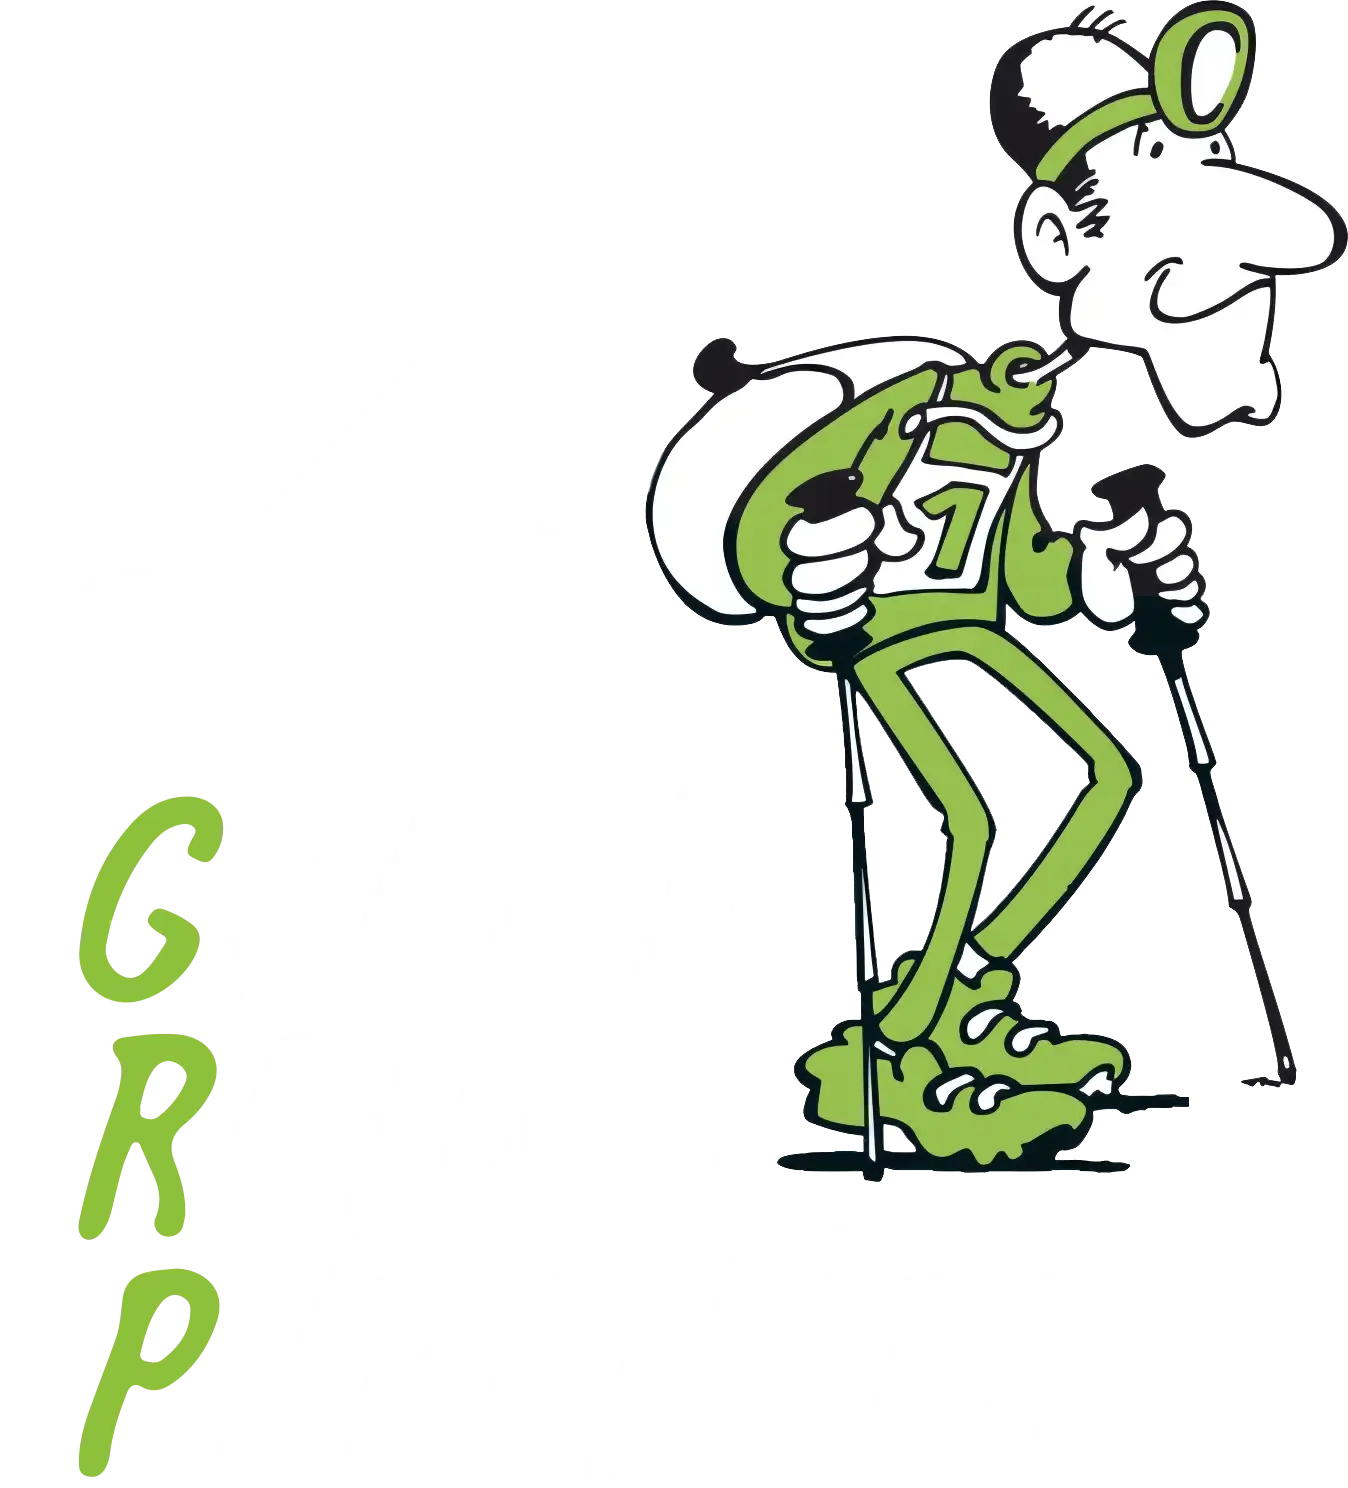 Great raid of the Pyrenees